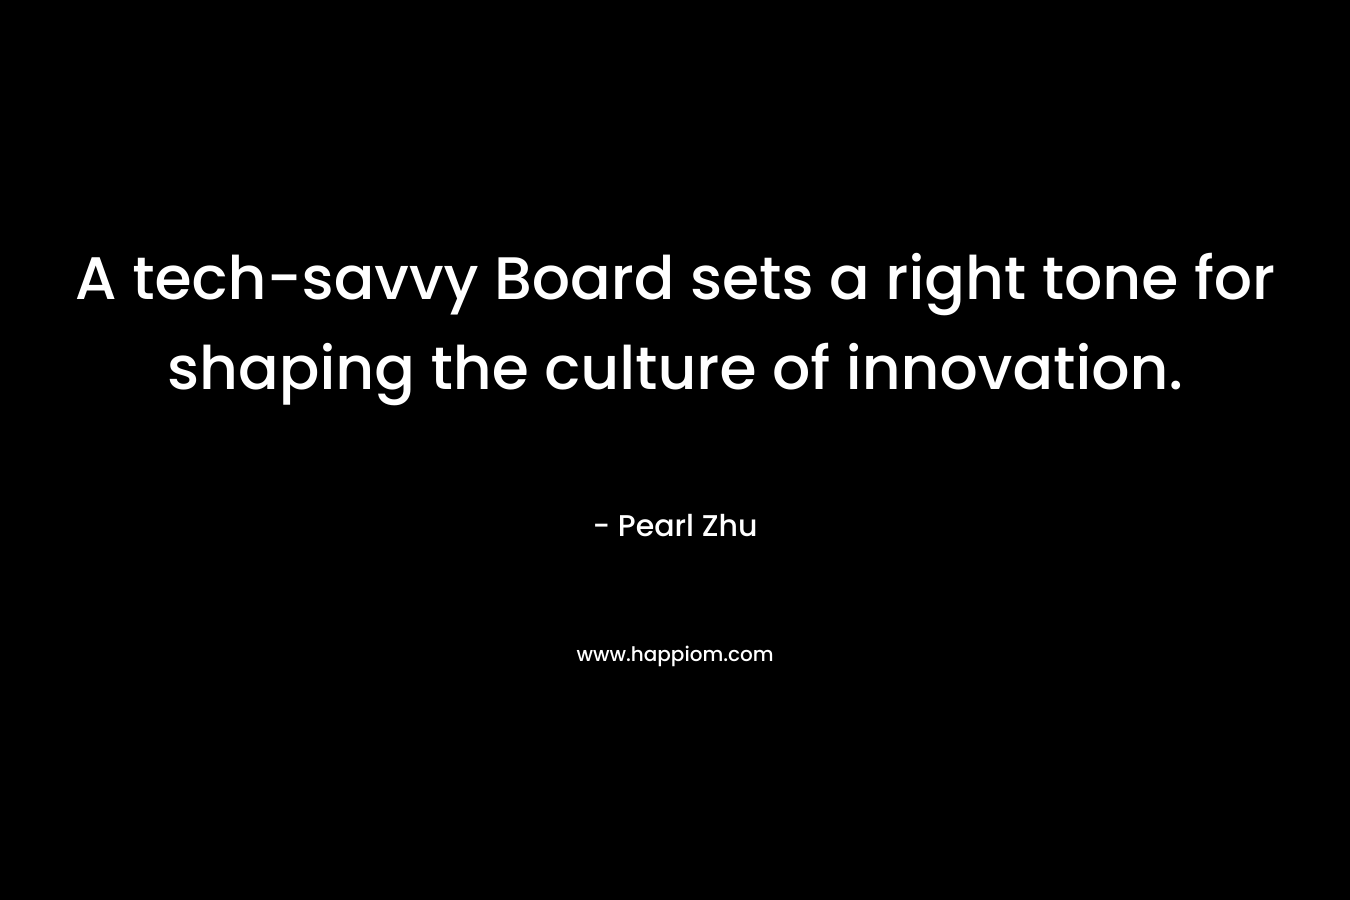 A tech-savvy Board sets a right tone for shaping the culture of innovation. – Pearl Zhu